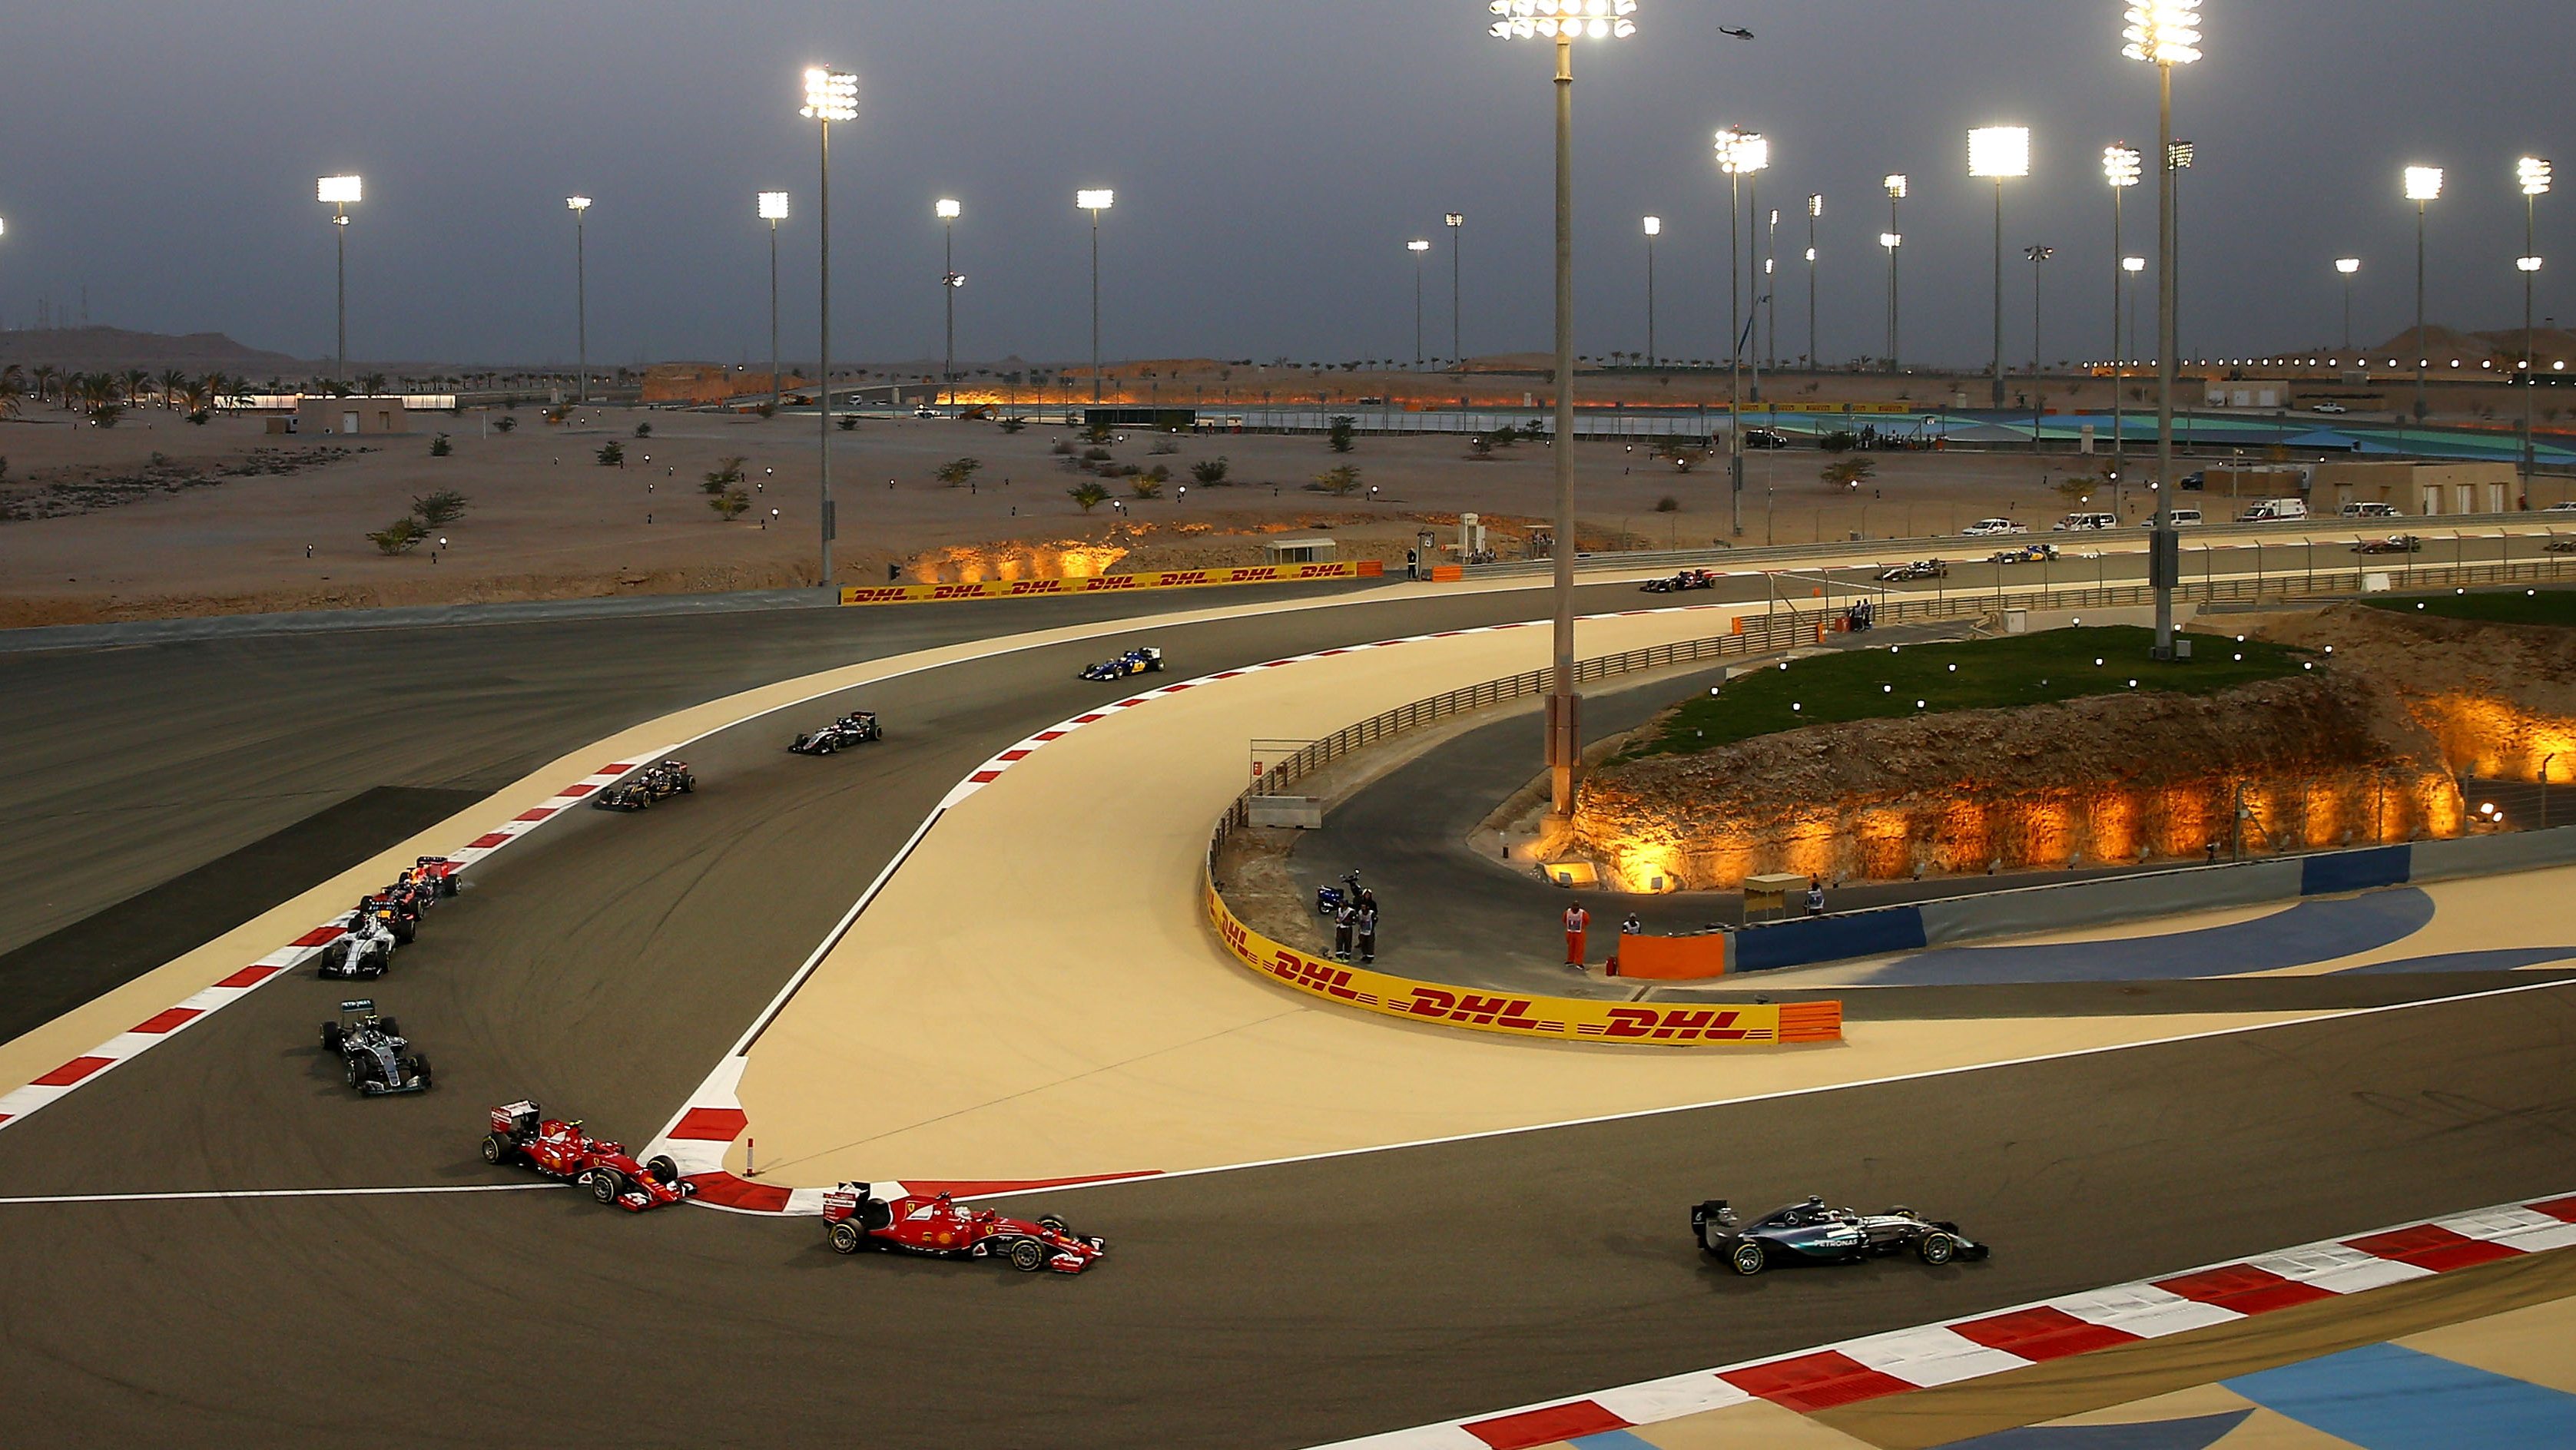 F1 Bahrain Grand Prix Live Stream How to Watch Online